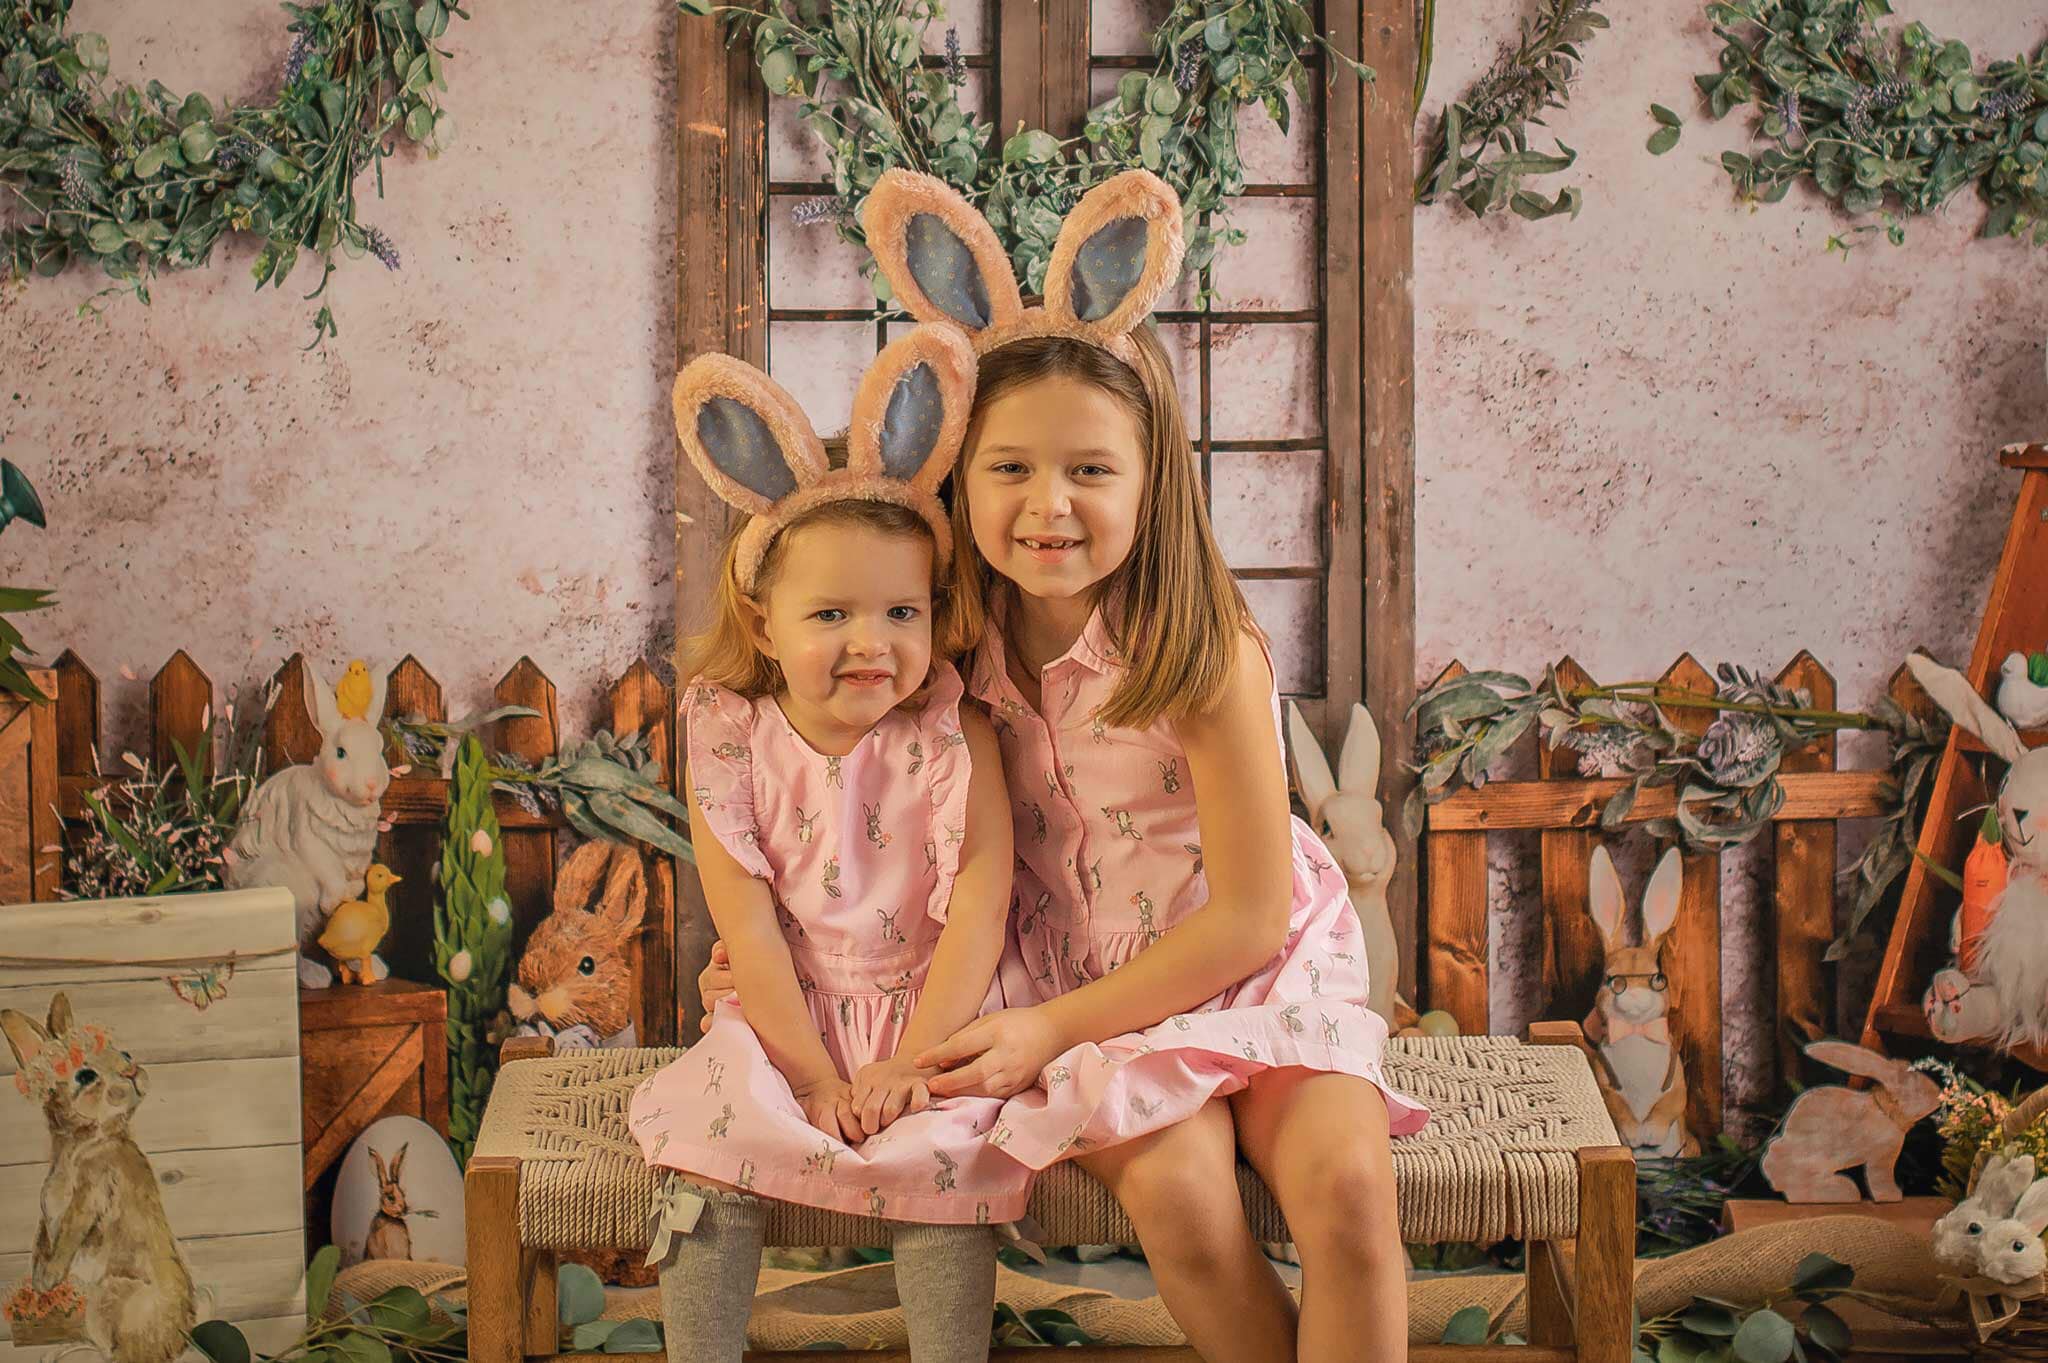 Kate Easter Garden Door Backdrop Rabbit for Photography Designed By Rose Abbas